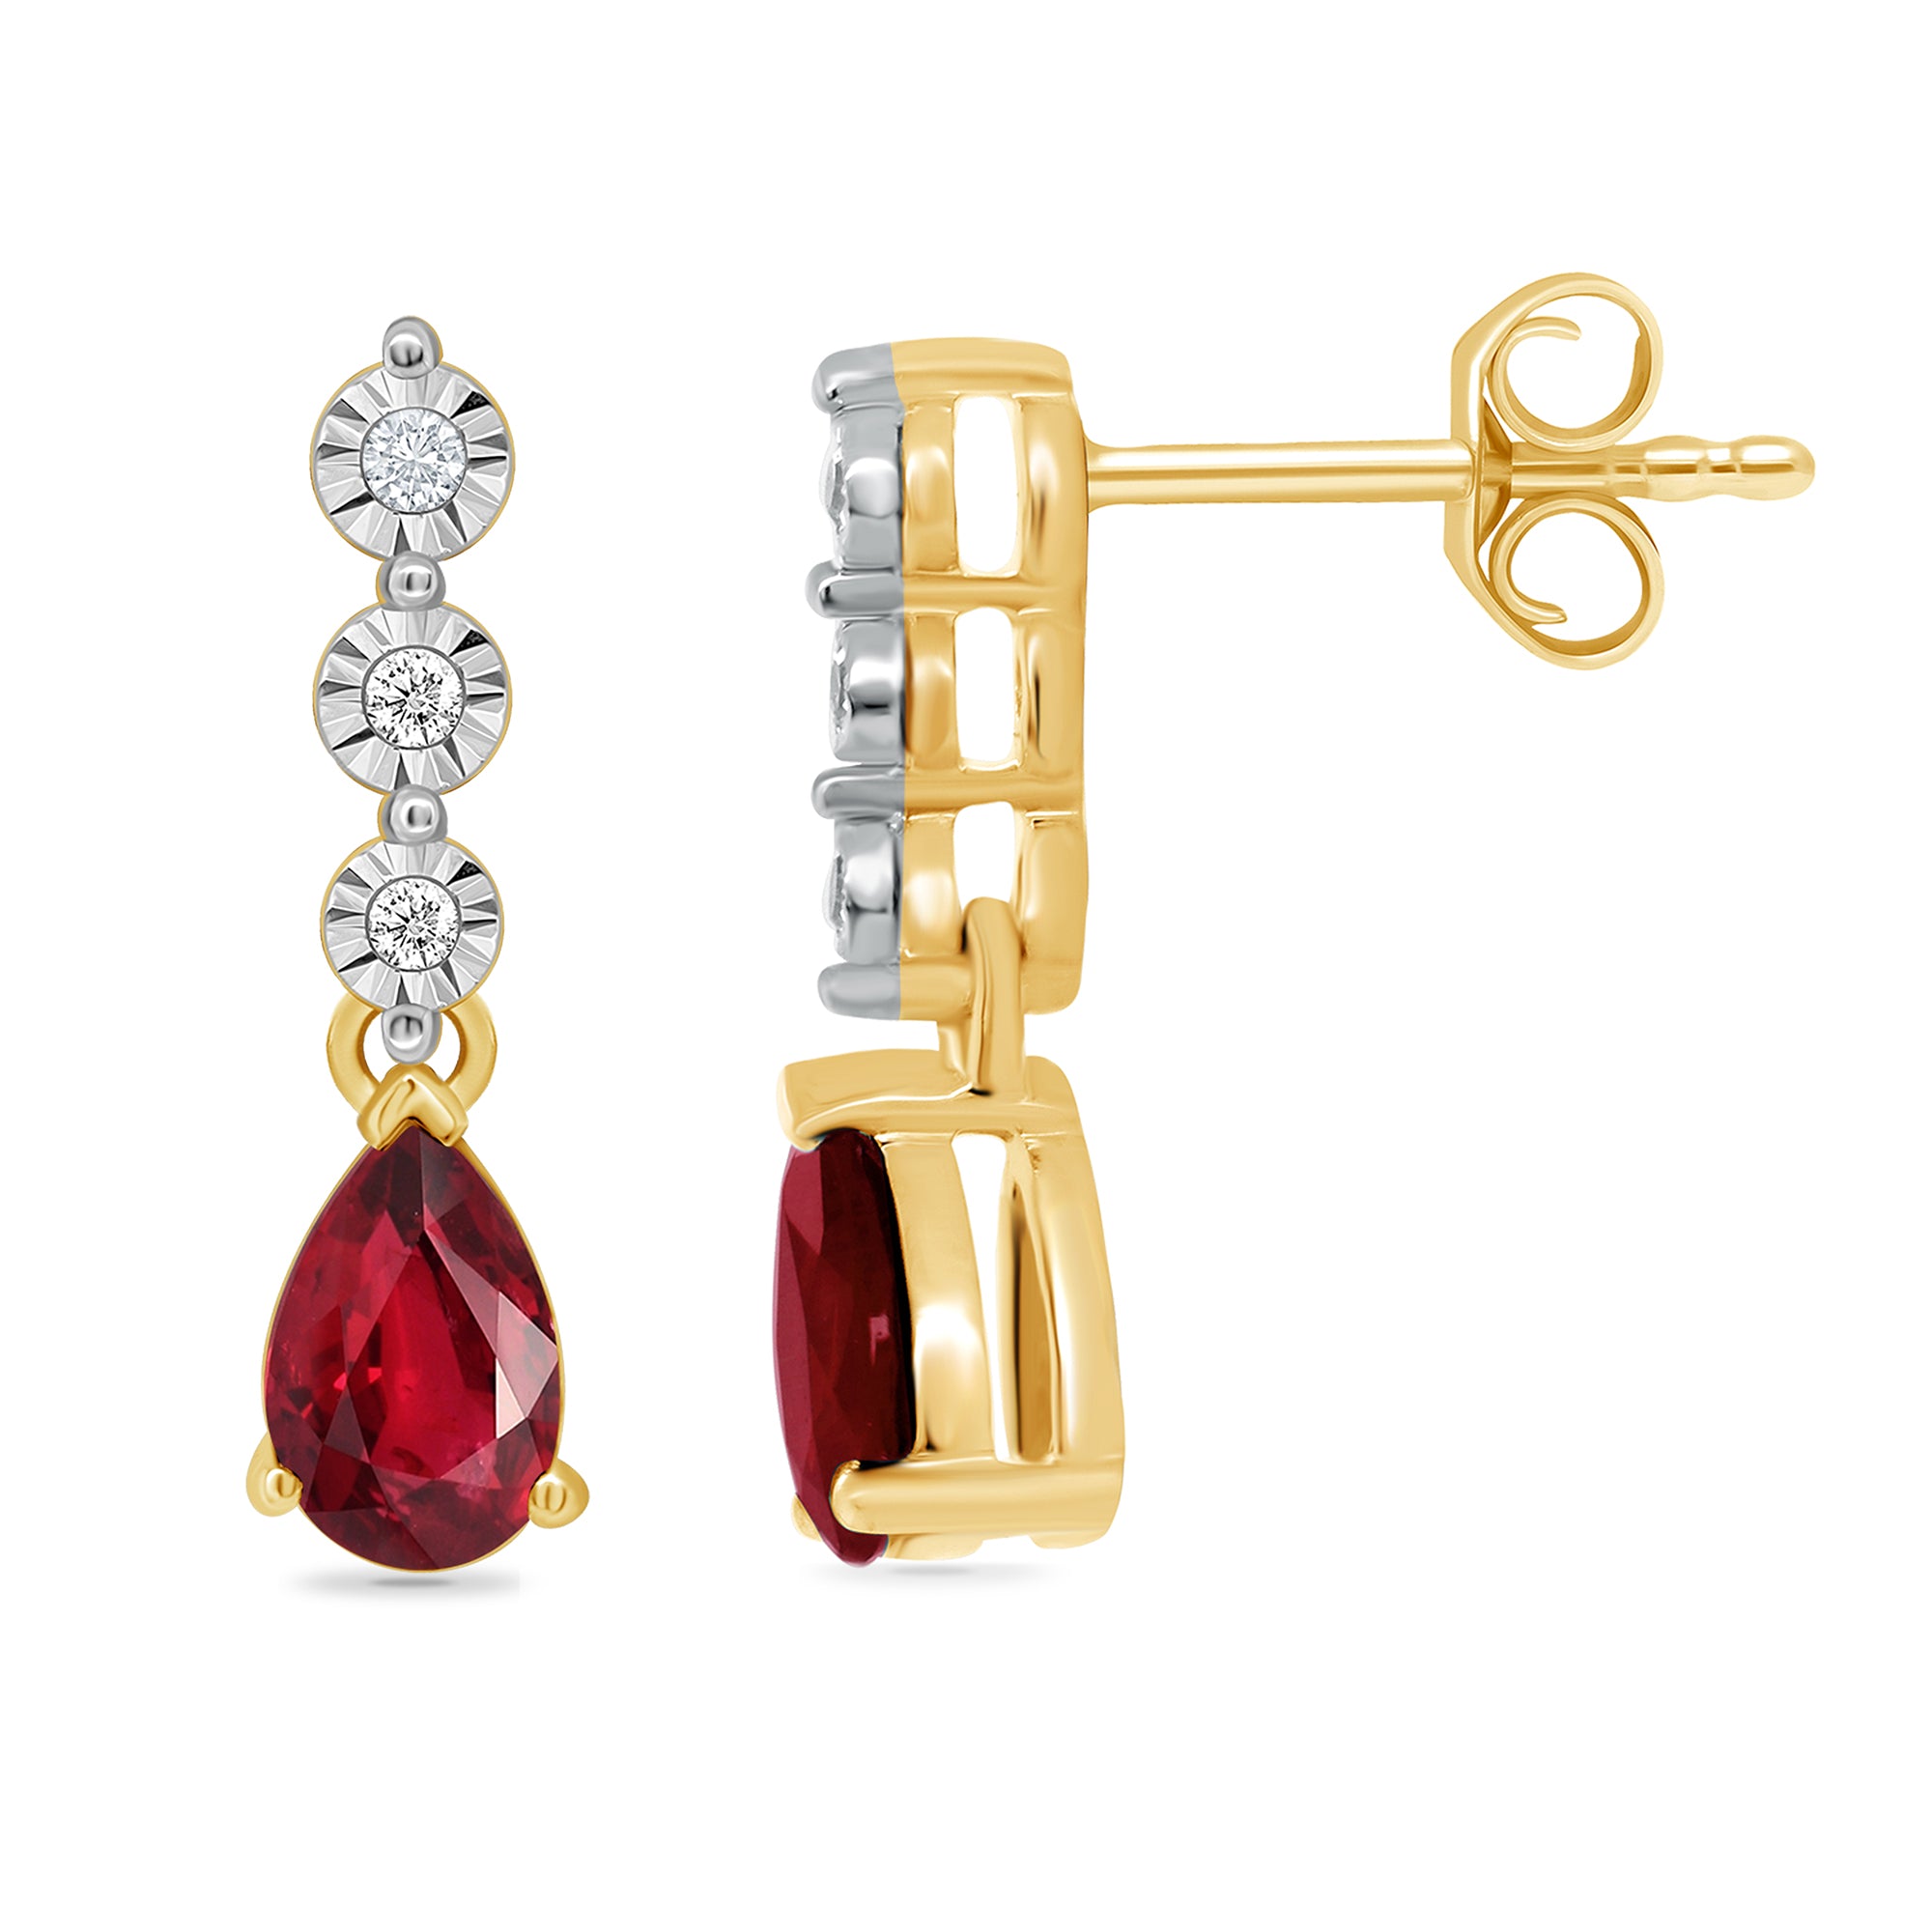 9ct gold 5x4mm pear shape ruby & miracle plate diamond drop earrings 0.02ct